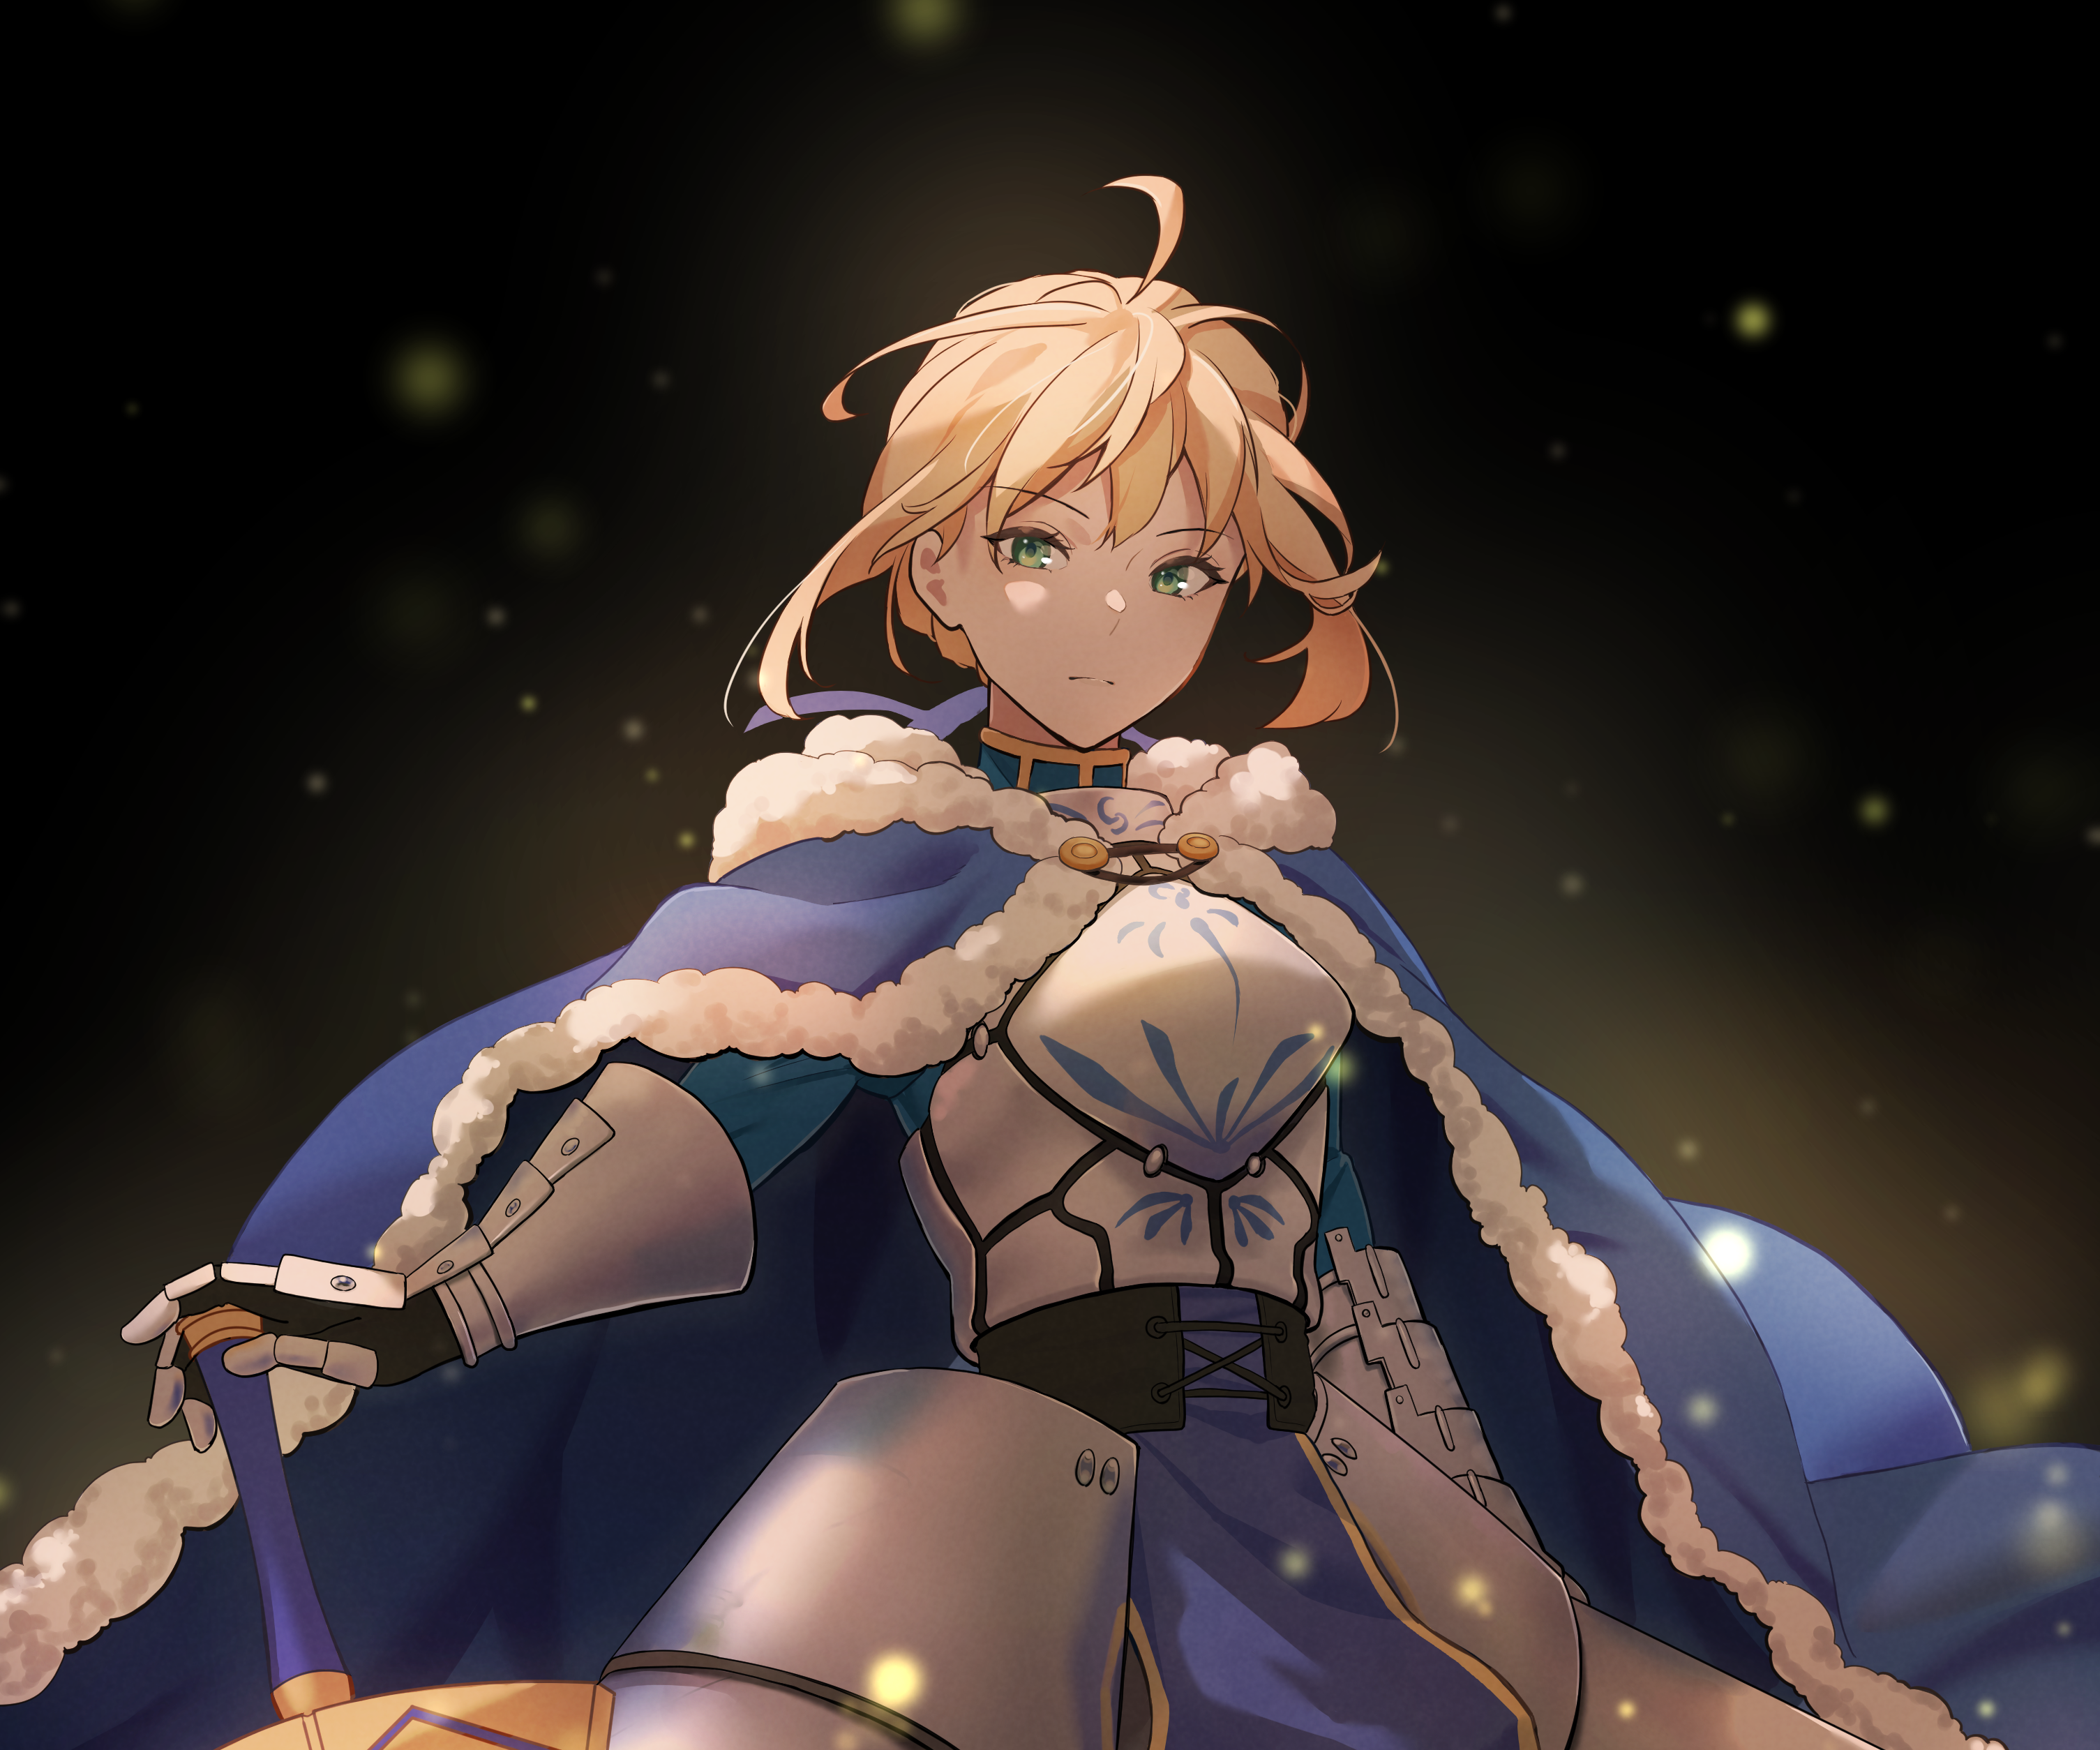 Saber (Fate-stay night)